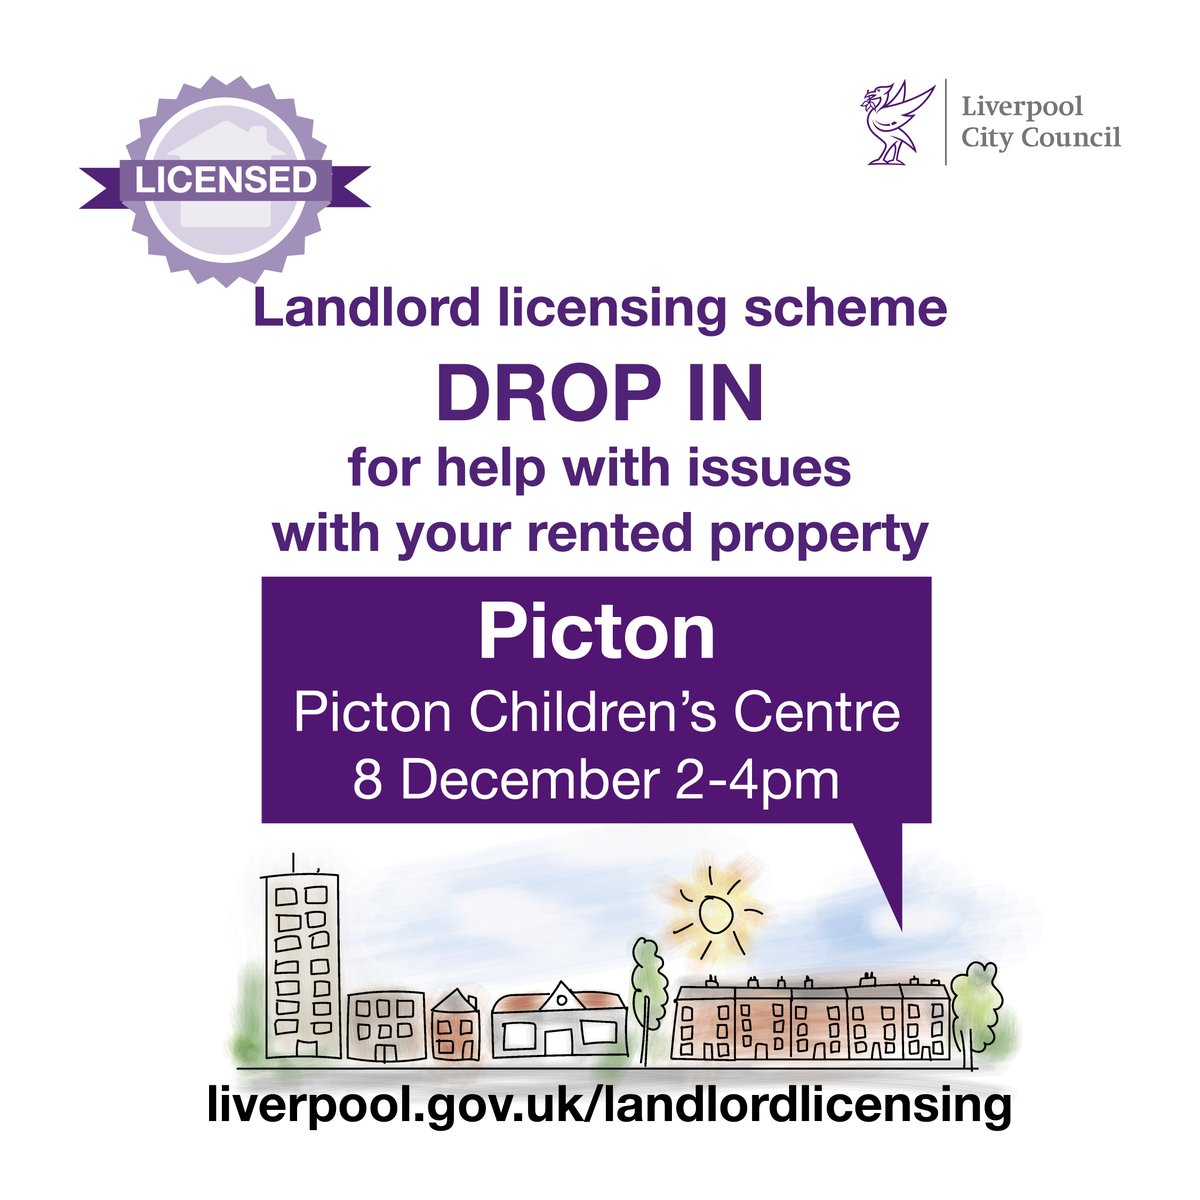 A drop-in event for tenants in private rented housing who have issues with their property is taking place at Picton Children's Centre on Thursday 8 December from 2-4pm, hosted by the council's Landlord Licensing team. Come along if you have issues with damp, hazards or ASB.